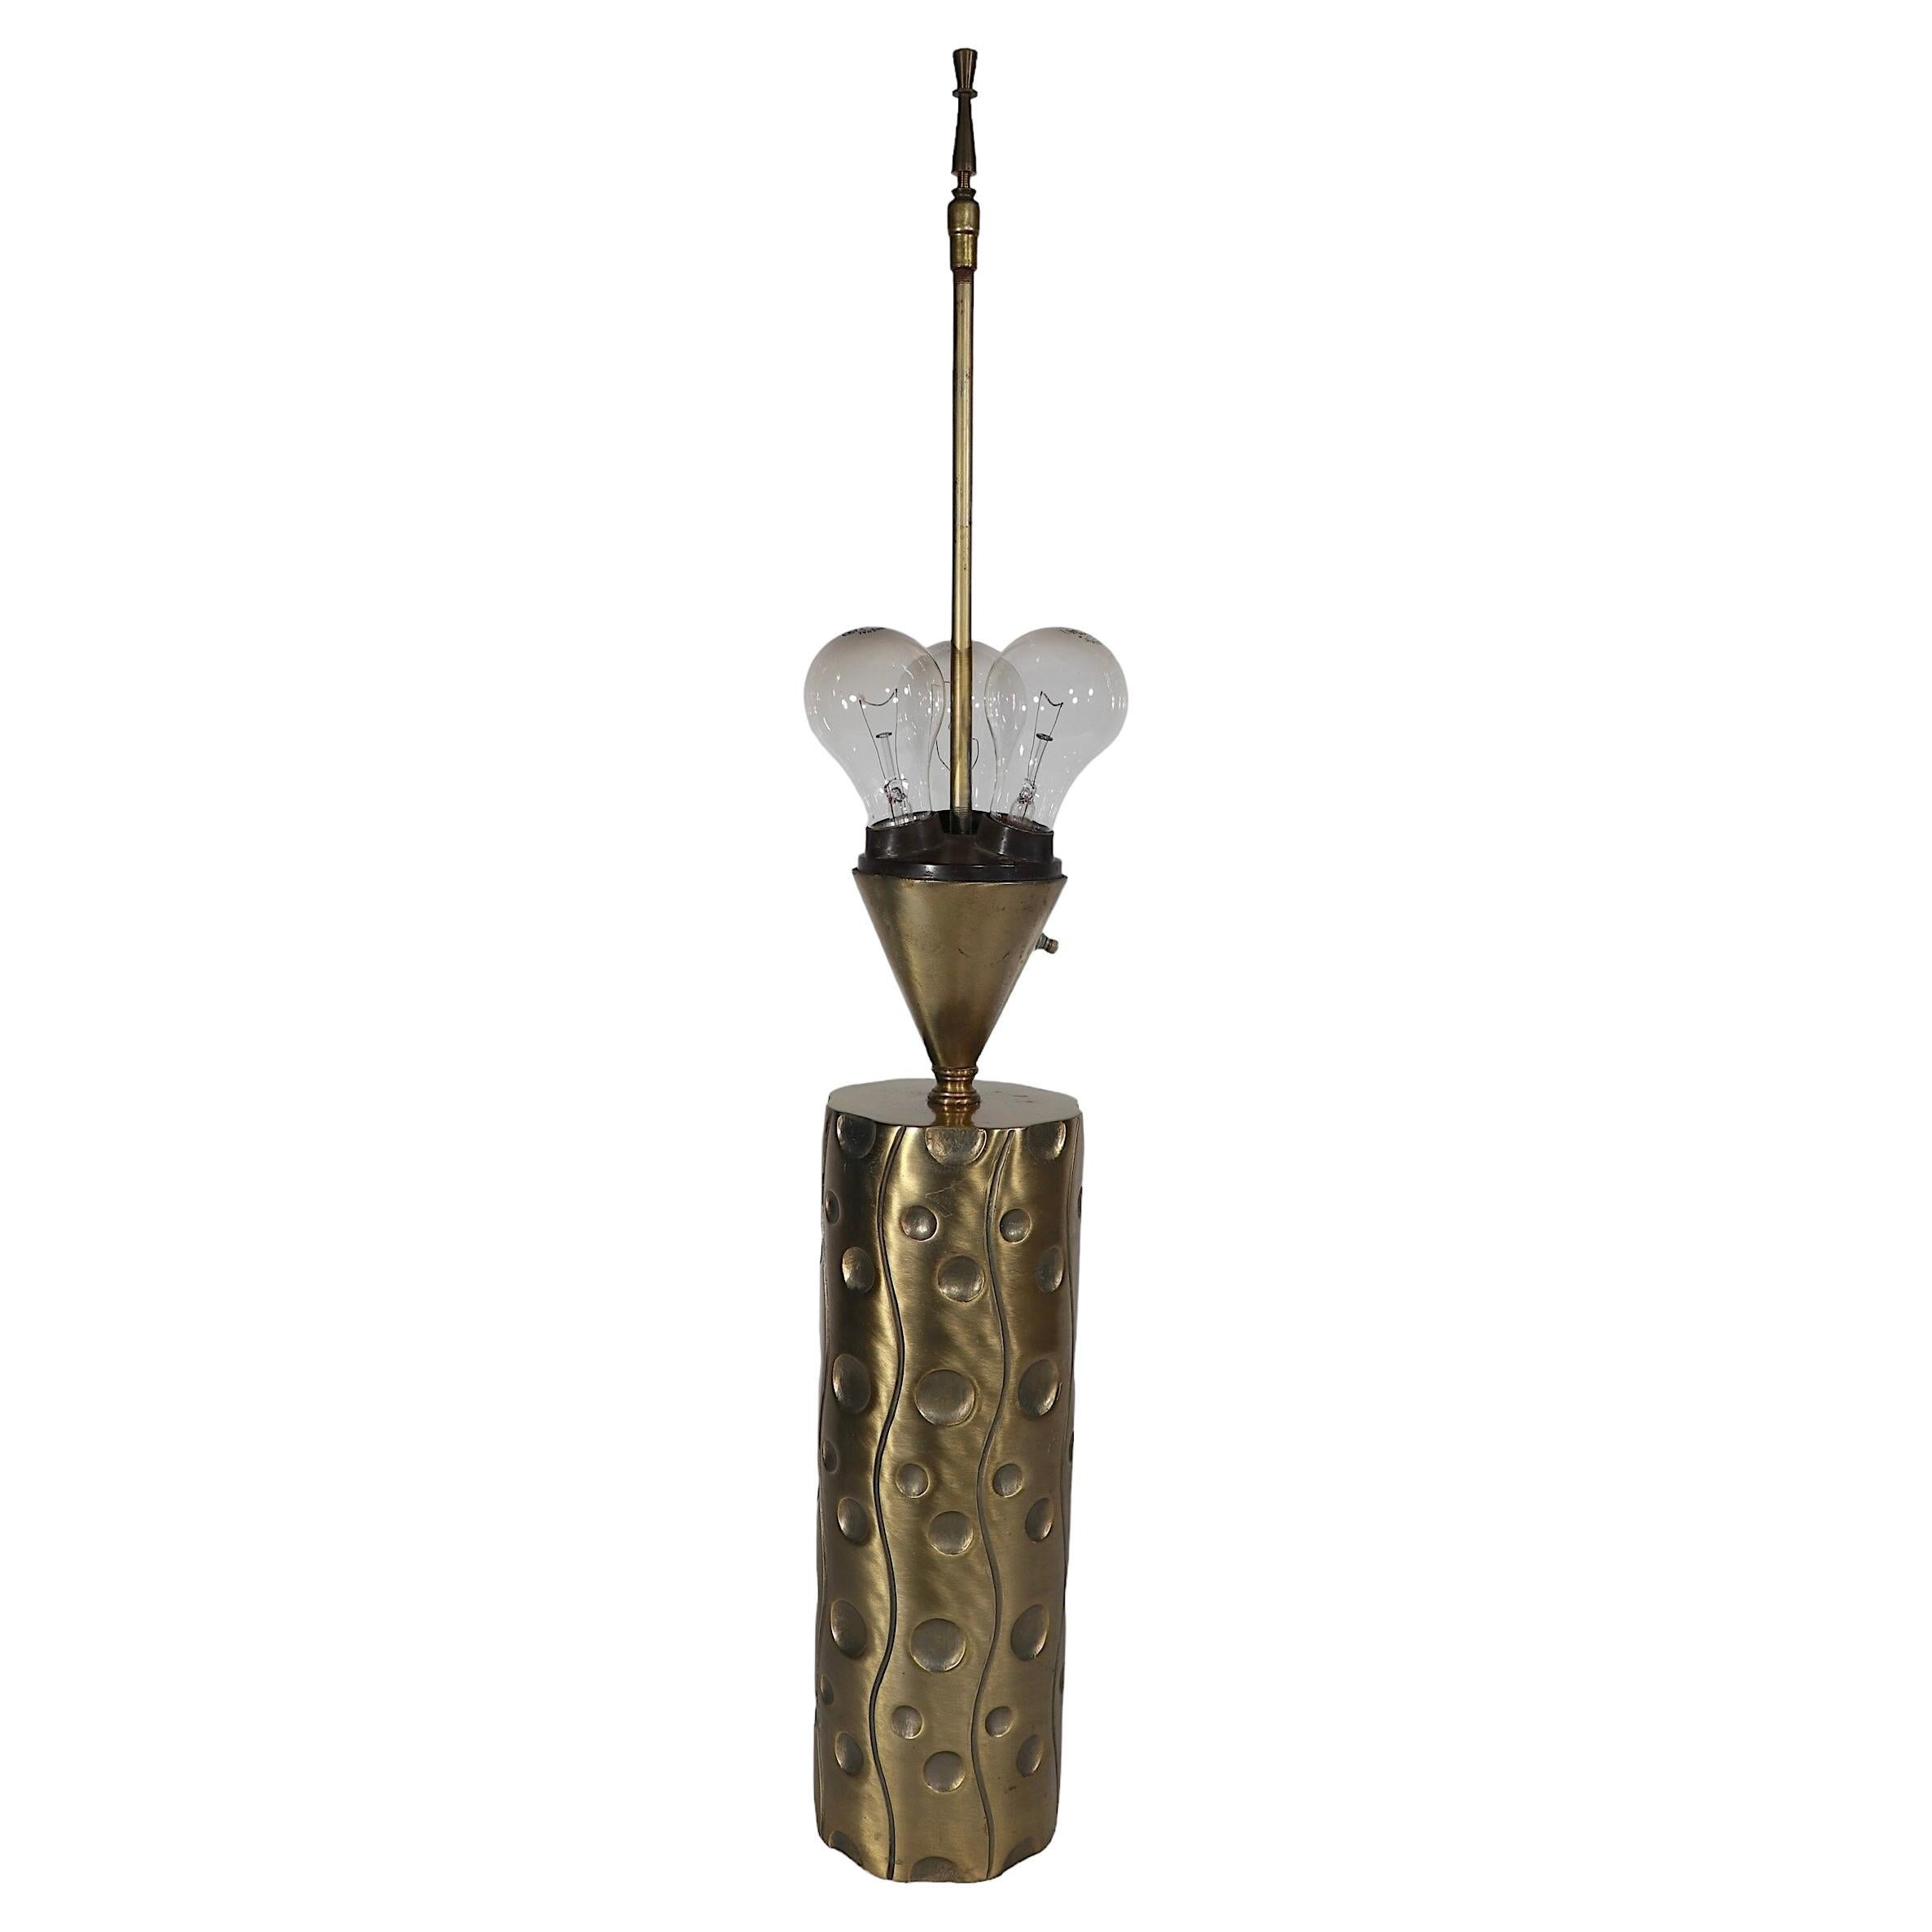 Voguish, chic and sophisticated table lamp having an organic wave like pattern on its cylindrical body with a cone form upper section which houses three sockets. The base is base metal with a faux brass/bronze finish. The lamp is in good, original,